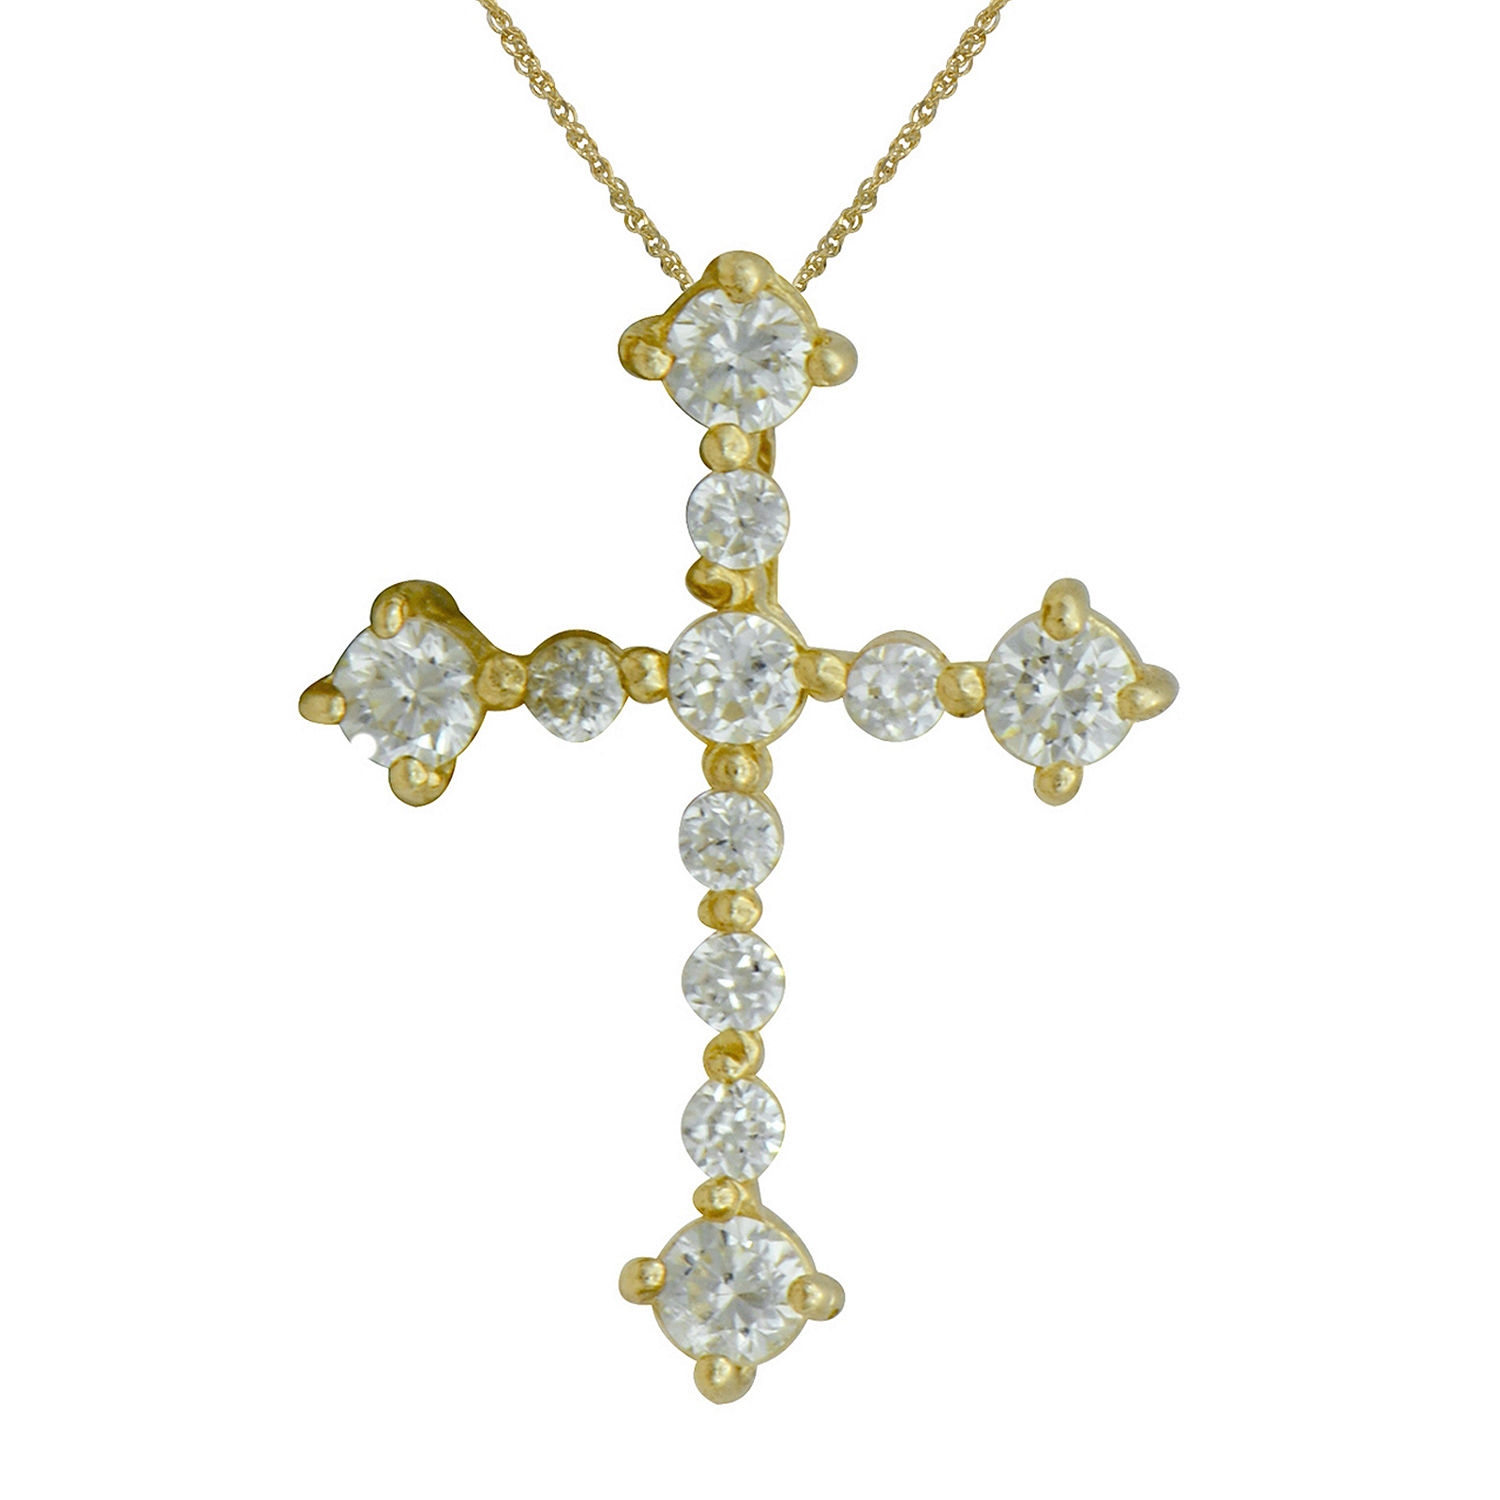 Girls Cubic Zirconia 14K Yellow Gold Cross Pendant Necklace - JCPenney